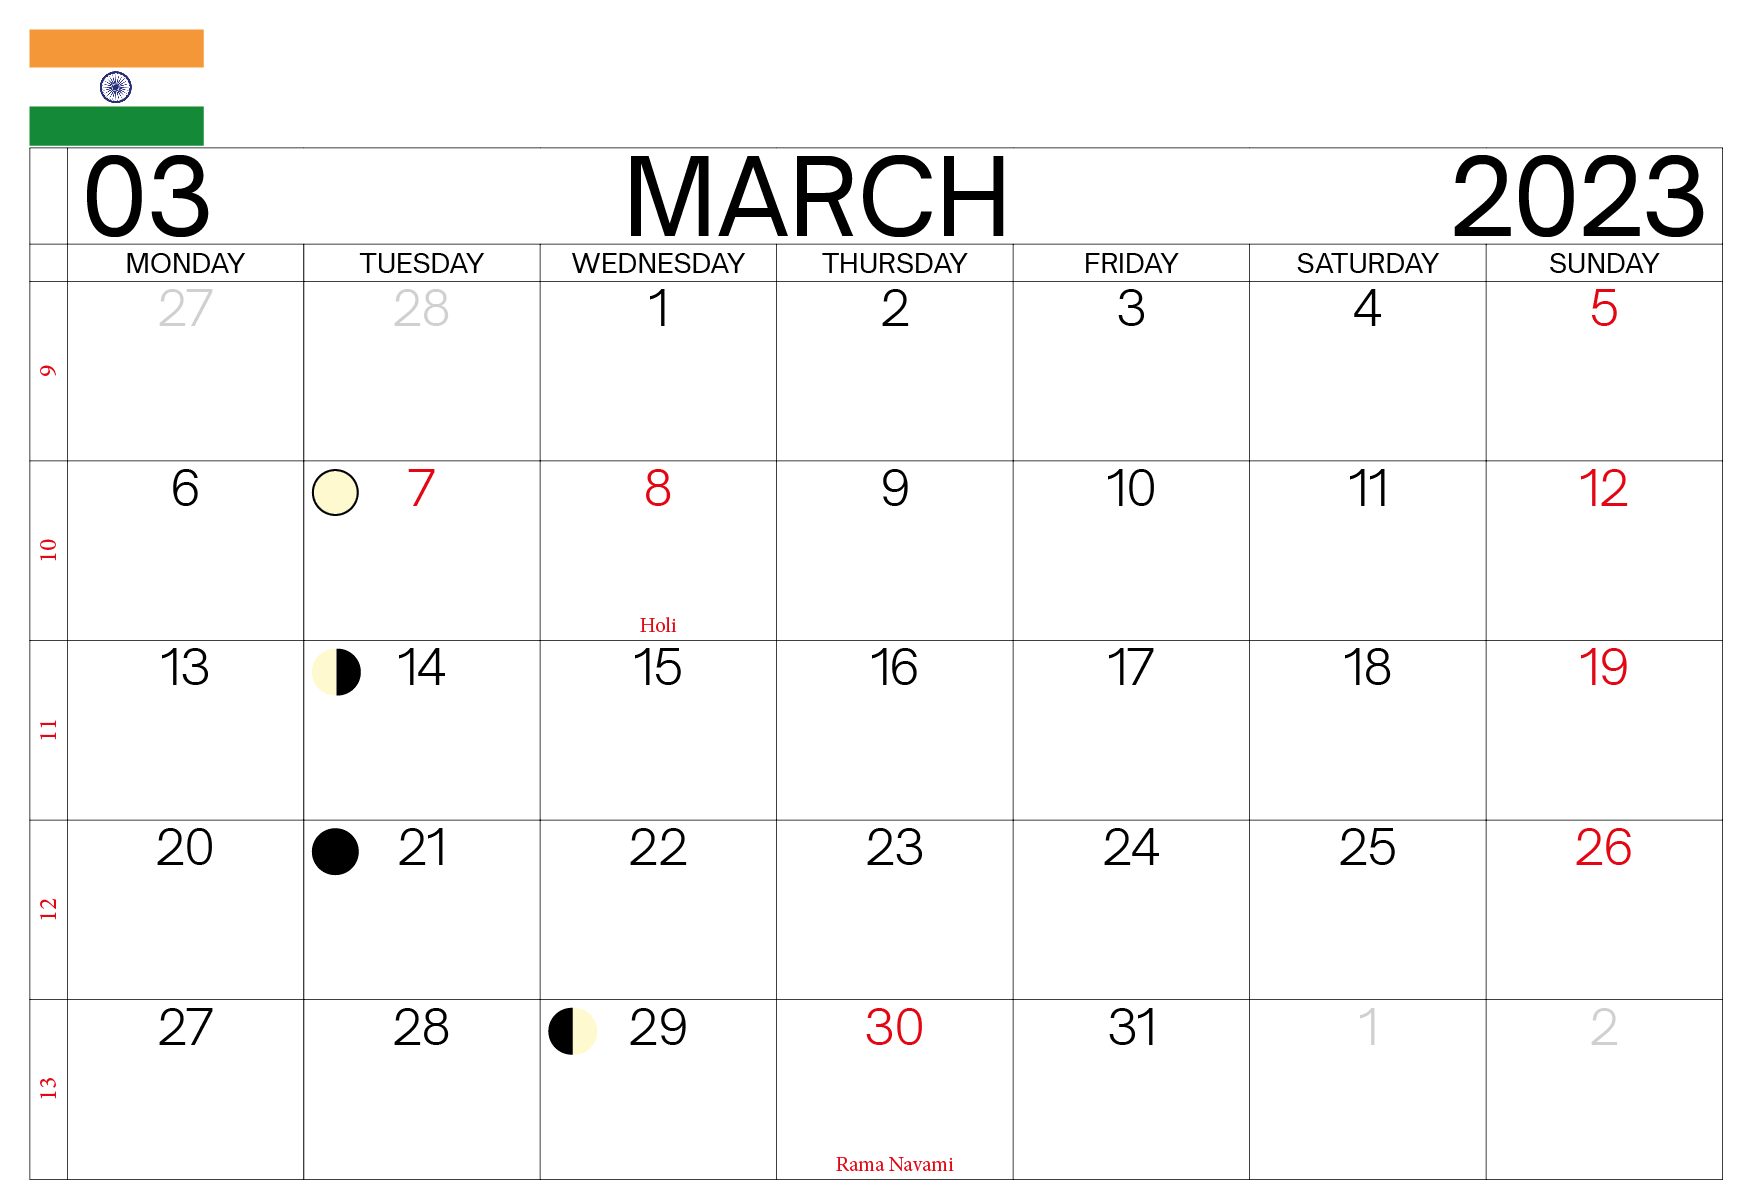 March 2023 Holidays Calendar with Dates